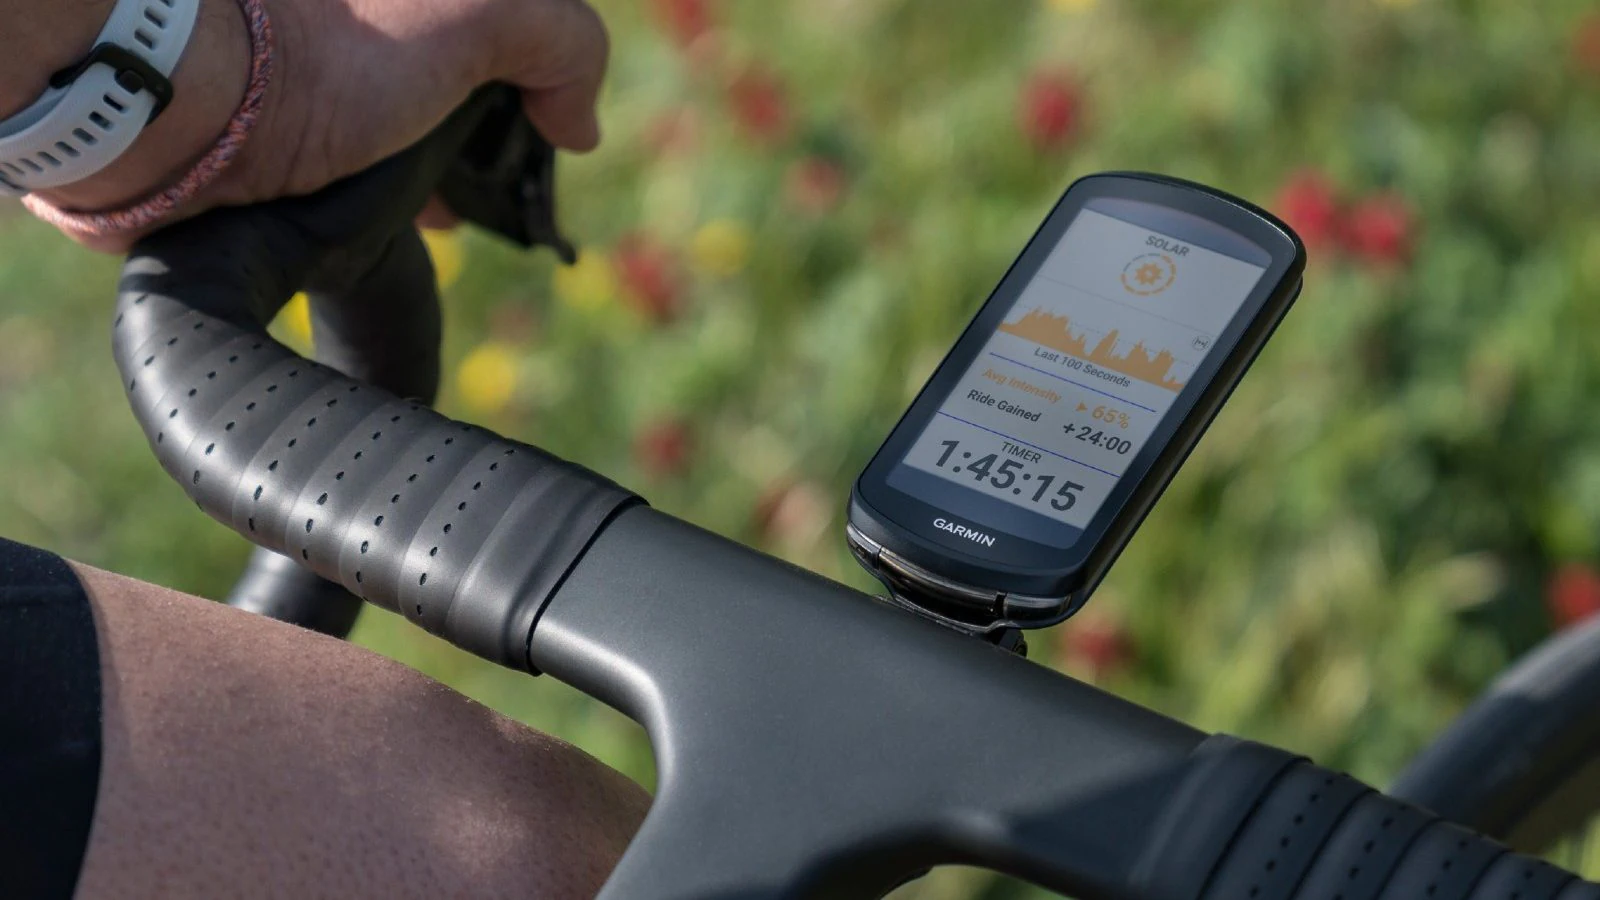 Garmin Edge 1040 Solar And Varia RCT715 Tail Light For Cyclists Launched in India: Price And Features